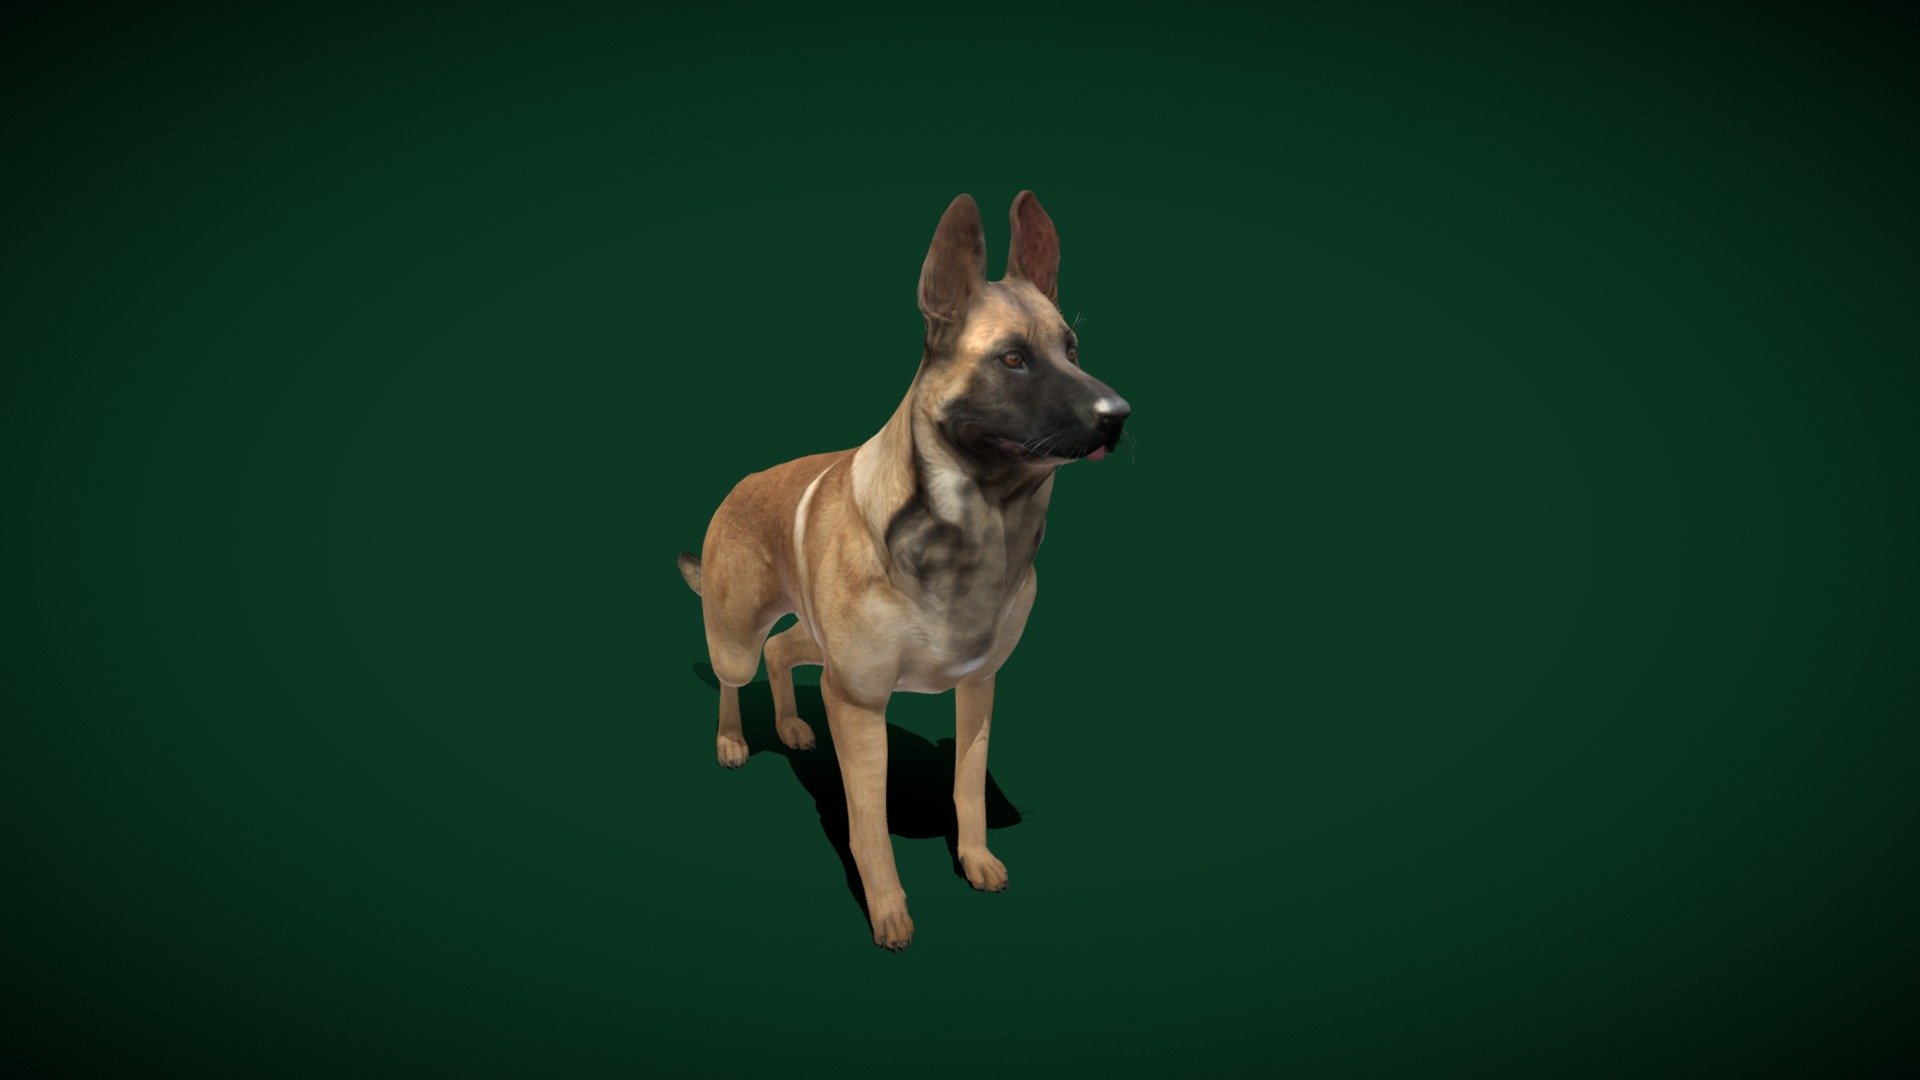 Belgian Malinois Dog Breed (well-muscled Dog )Pet Cute

Canis_lupus_familiaris Animal Mammal  (herding and working dog)

1 Draw Calls

High Poly

GameReady

12 Animations

4K PBR Textures Material

Unreal FBX (Unreal 4,5 Plus)

Unity FBX  

Blend File 

USDZ File (AR Ready). Real Scale Dimension

Textures Files

GLB File (Unreal 5.1  Plus Native Support)


Gltf File ( Spark AR, Lens Studio(SnapChat) , Effector(Tiktok) , Spline, Play Canvas ) Compatible




Triangles : 33448



Vertices  : 17299

Faces     : 33445

Edges     : 50671

Diffuse, Metallic, Roughness , Normal Map ,Specular Map,AO,

The Belgian Shepherd is a breed of medium-sized herding dog from Belgium. While predominantly considered a single breed, it is bred in four distinct varieties based on coat type and colour; the long-haired &hellip; Wikipedia
Temperament: Stubborn, Friendly, Alert, Hard-working, Confident, Active, Protective, Watchful - Belgian Malinois Dog (Game Ready) - Buy Royalty Free 3D model by Nyilonelycompany 3d model